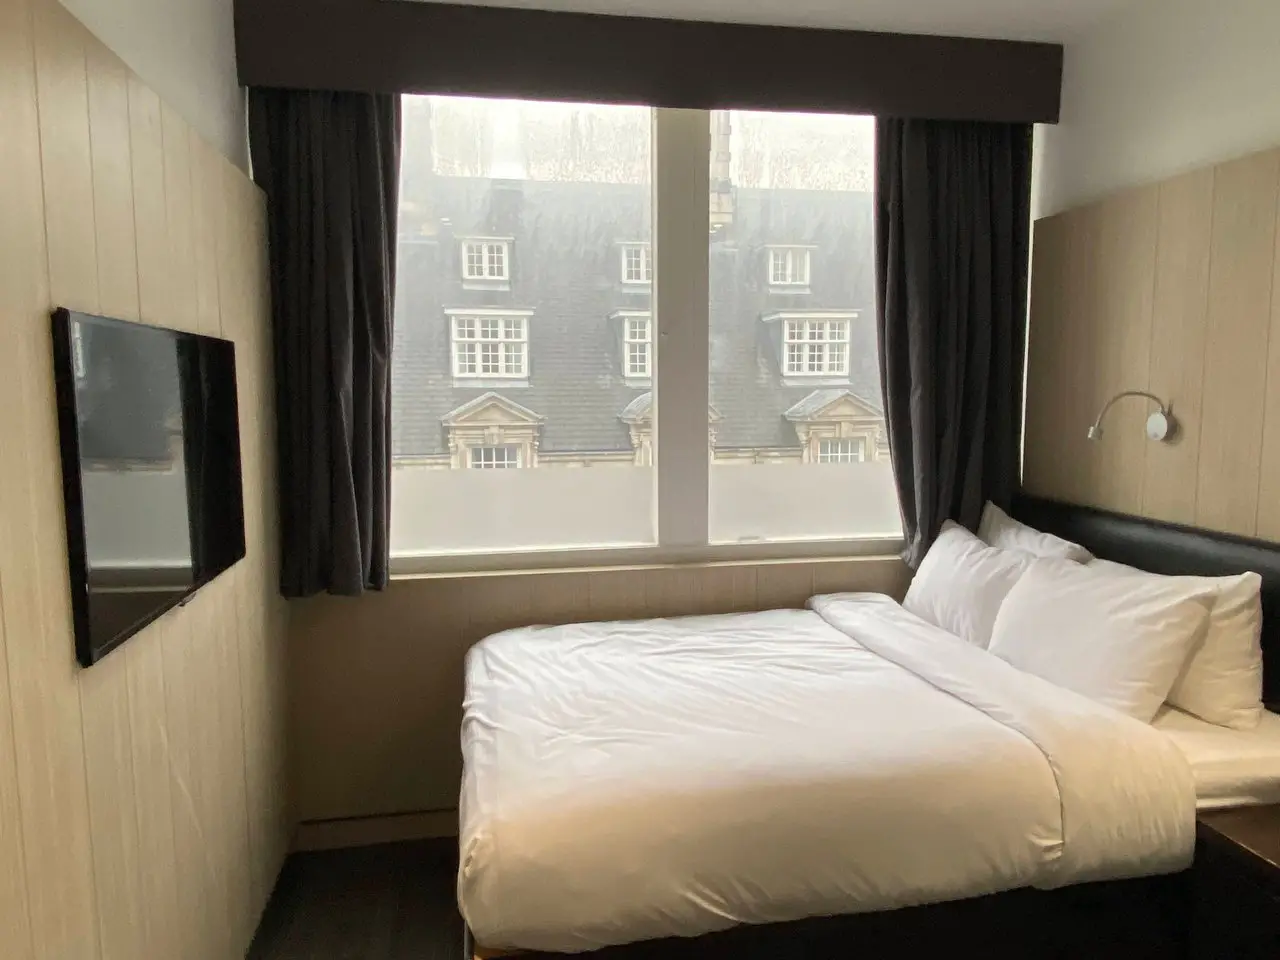 Inside a bedroom at the Z Hotel in Liverpool, showing a double bed with white sheets, brown curtains, and a flat-screen TV on the wall.